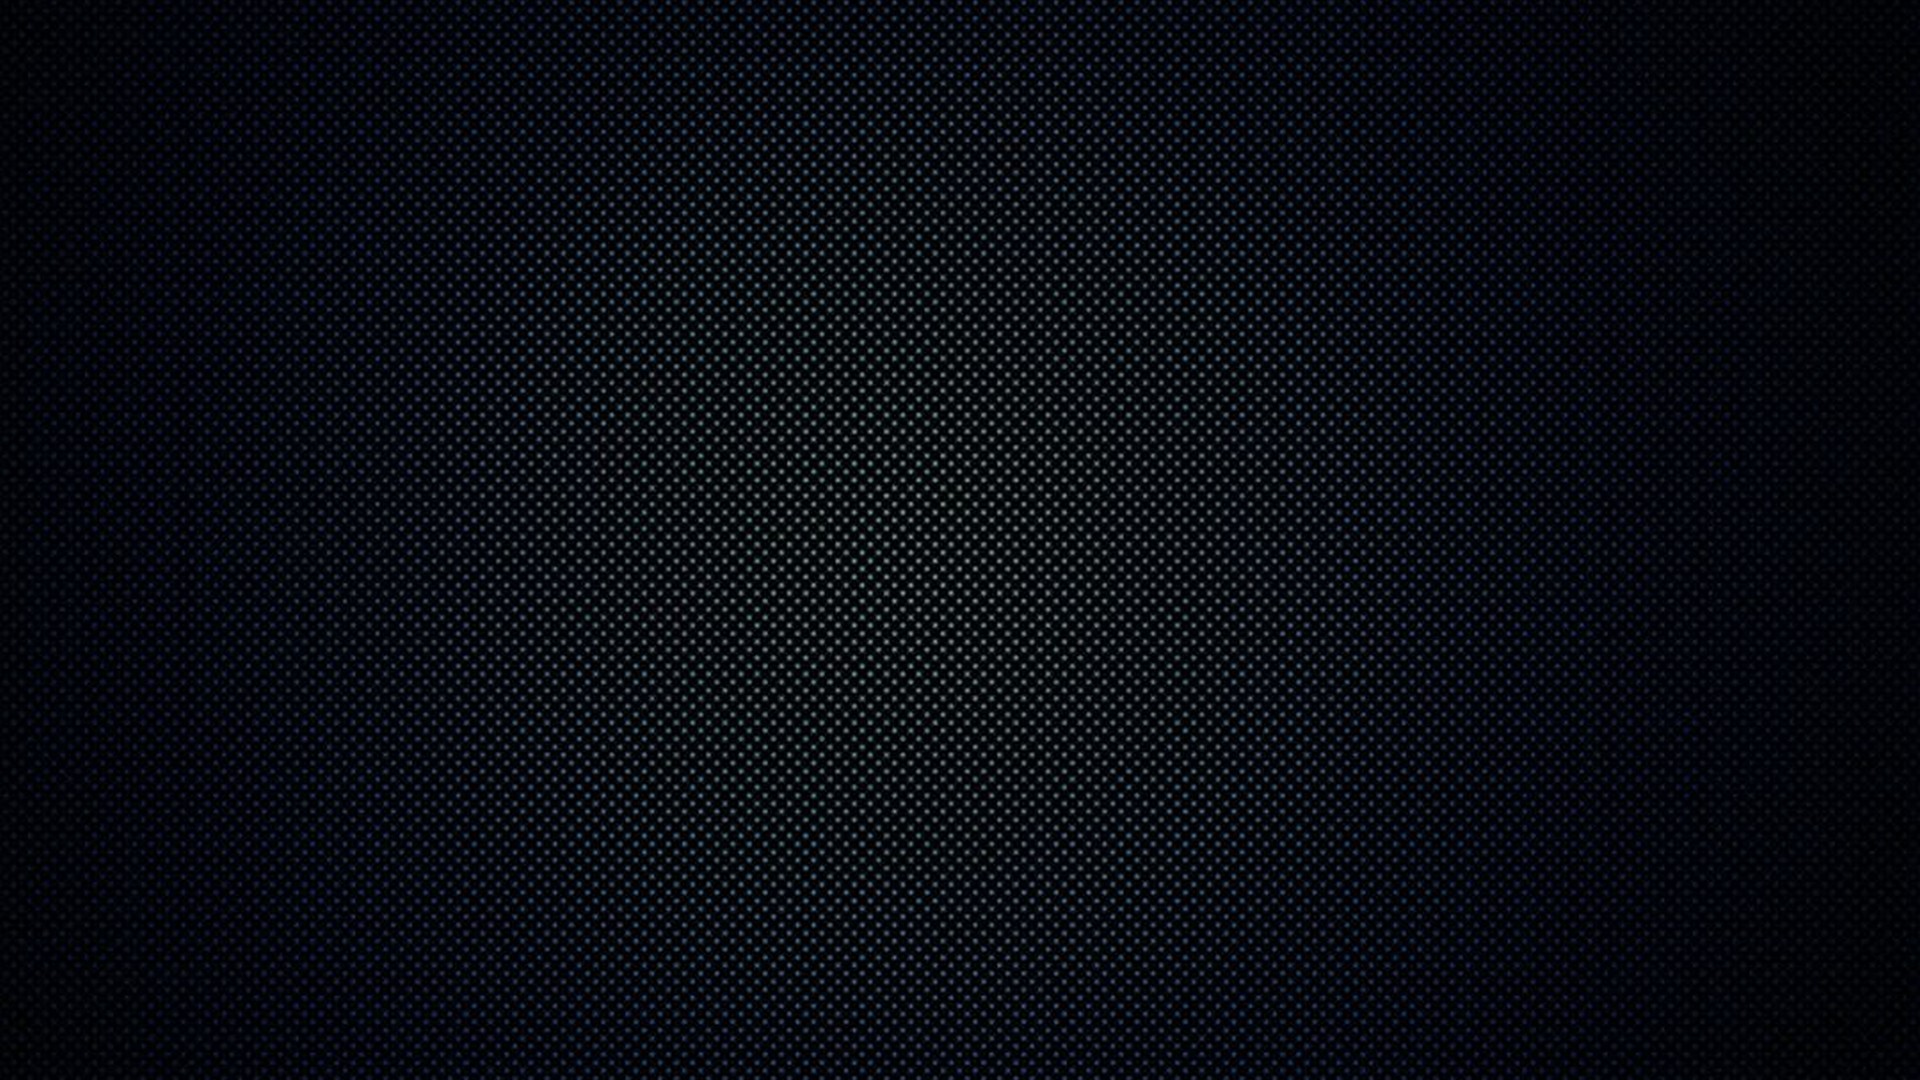 HD Wallpaper All Black With high-resolution 1920X1080 pixel. You can use this wallpaper for your Desktop Computer Backgrounds, Mac Wallpapers, Android Lock screen or iPhone Screensavers and another smartphone device